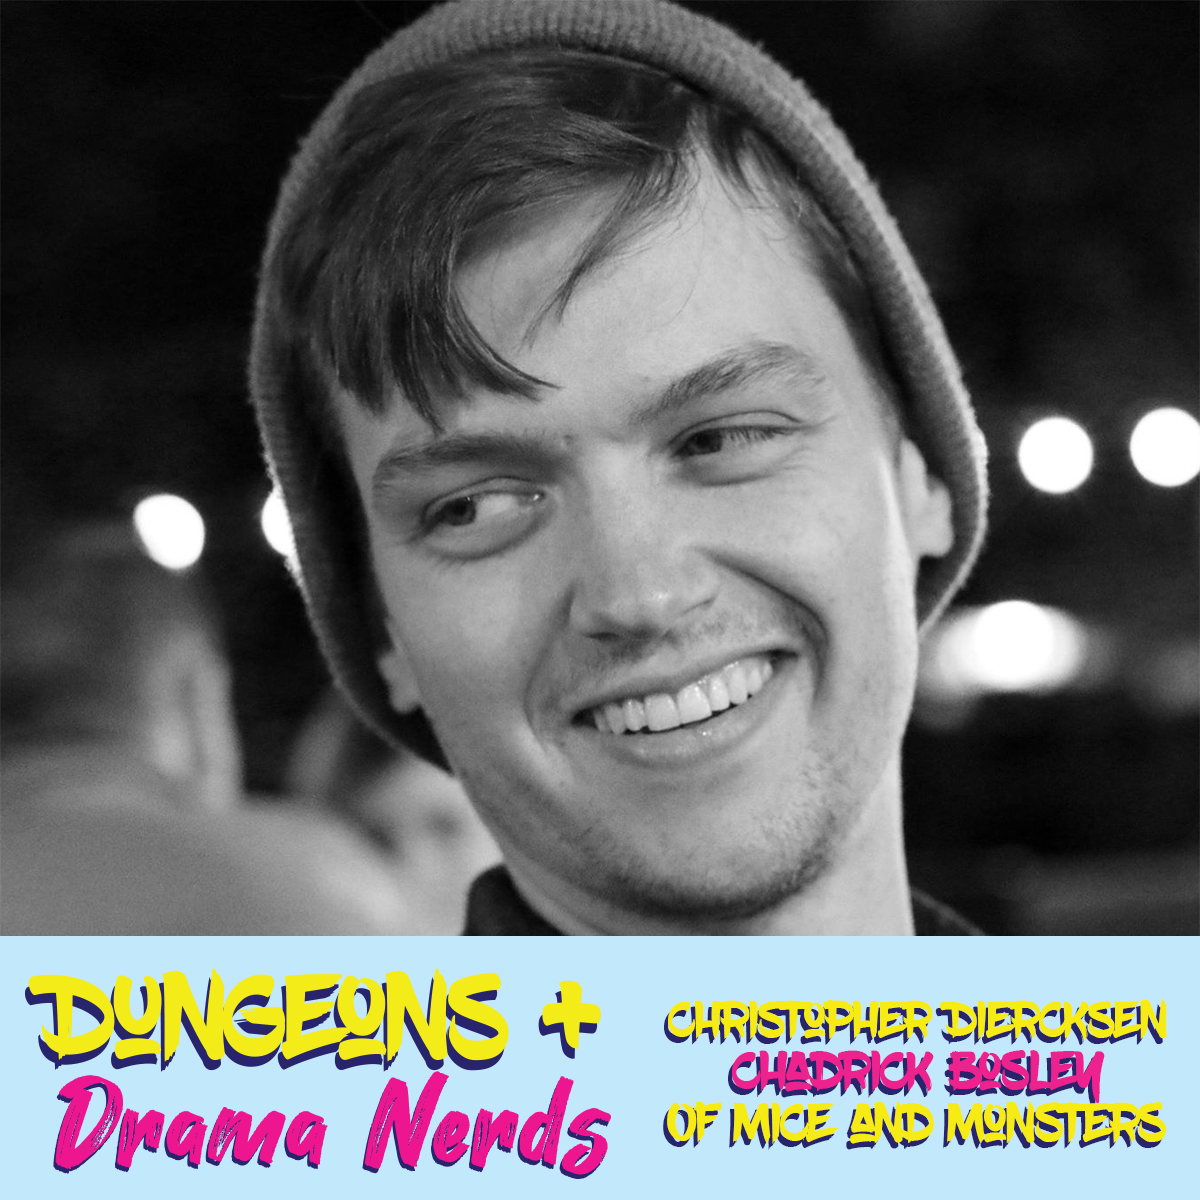 We should probably introduce you to our players a little more formally... right?Meet Christopher Diercksen ( @C_Diercks)​ who plays Chadrick Bosley in our D&D 5E Campaign,  #OfMiceAndMonsters written by Matthew Minnicino​!